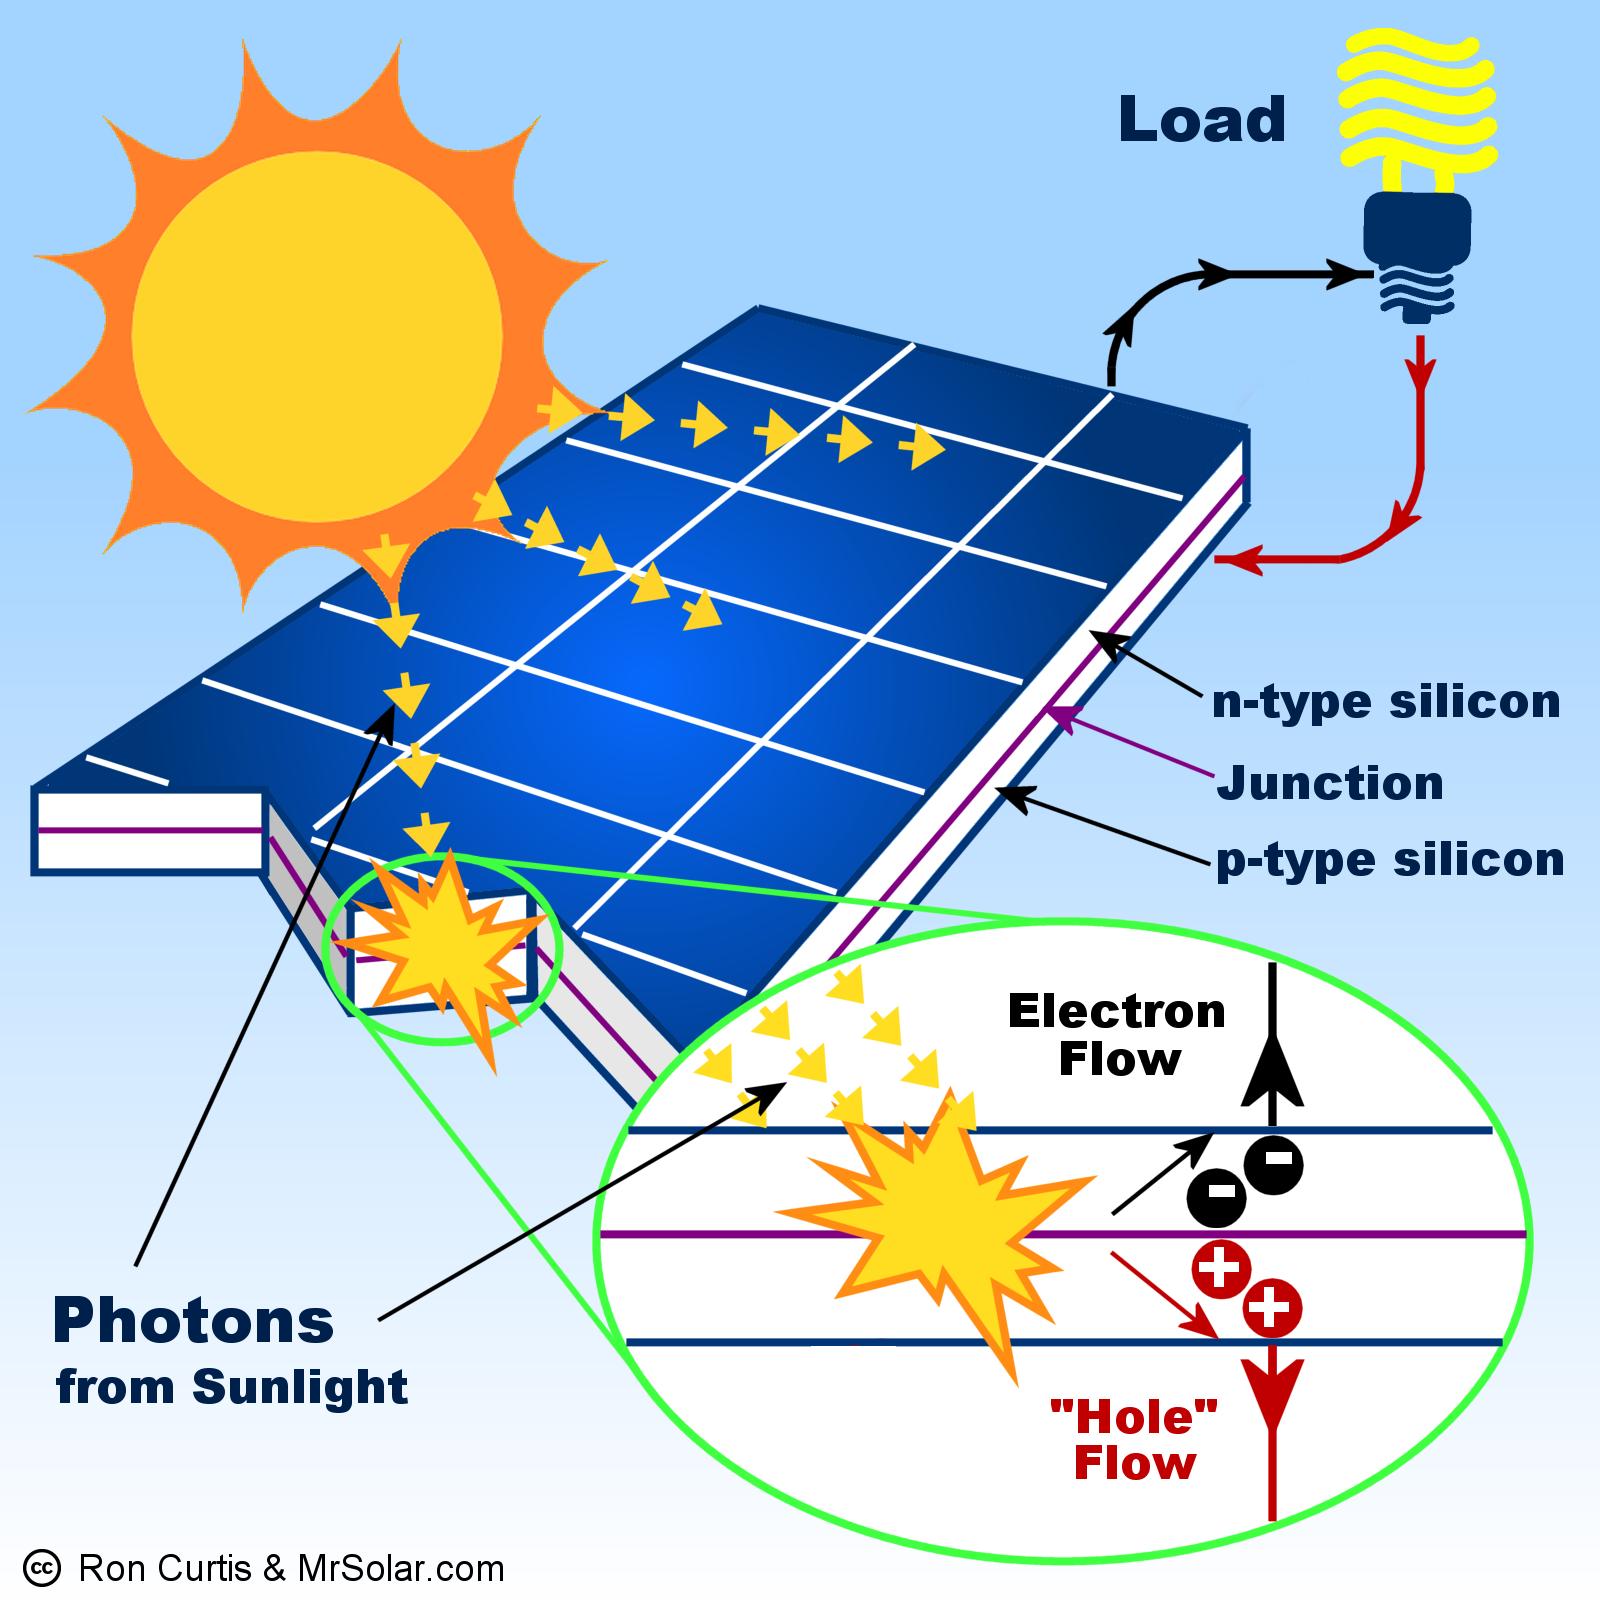 about solar panel - What are the advantages of solar panel